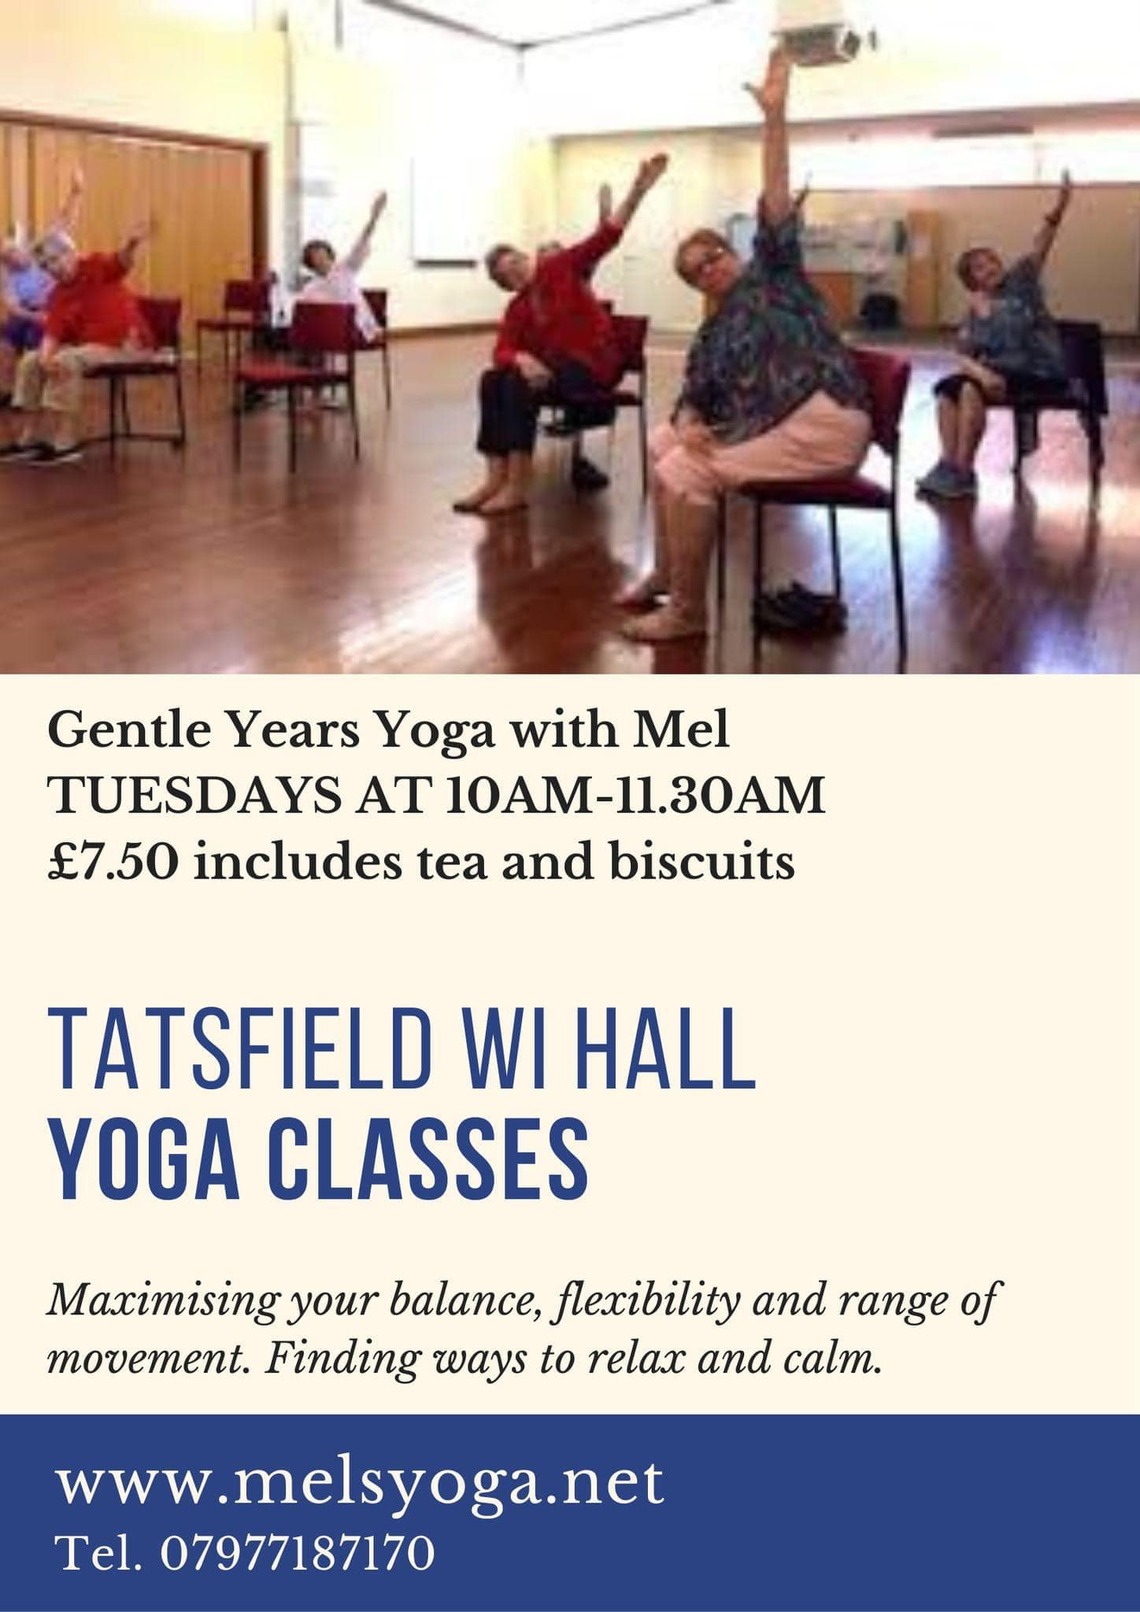 A - Gentle years Yoga with Mel